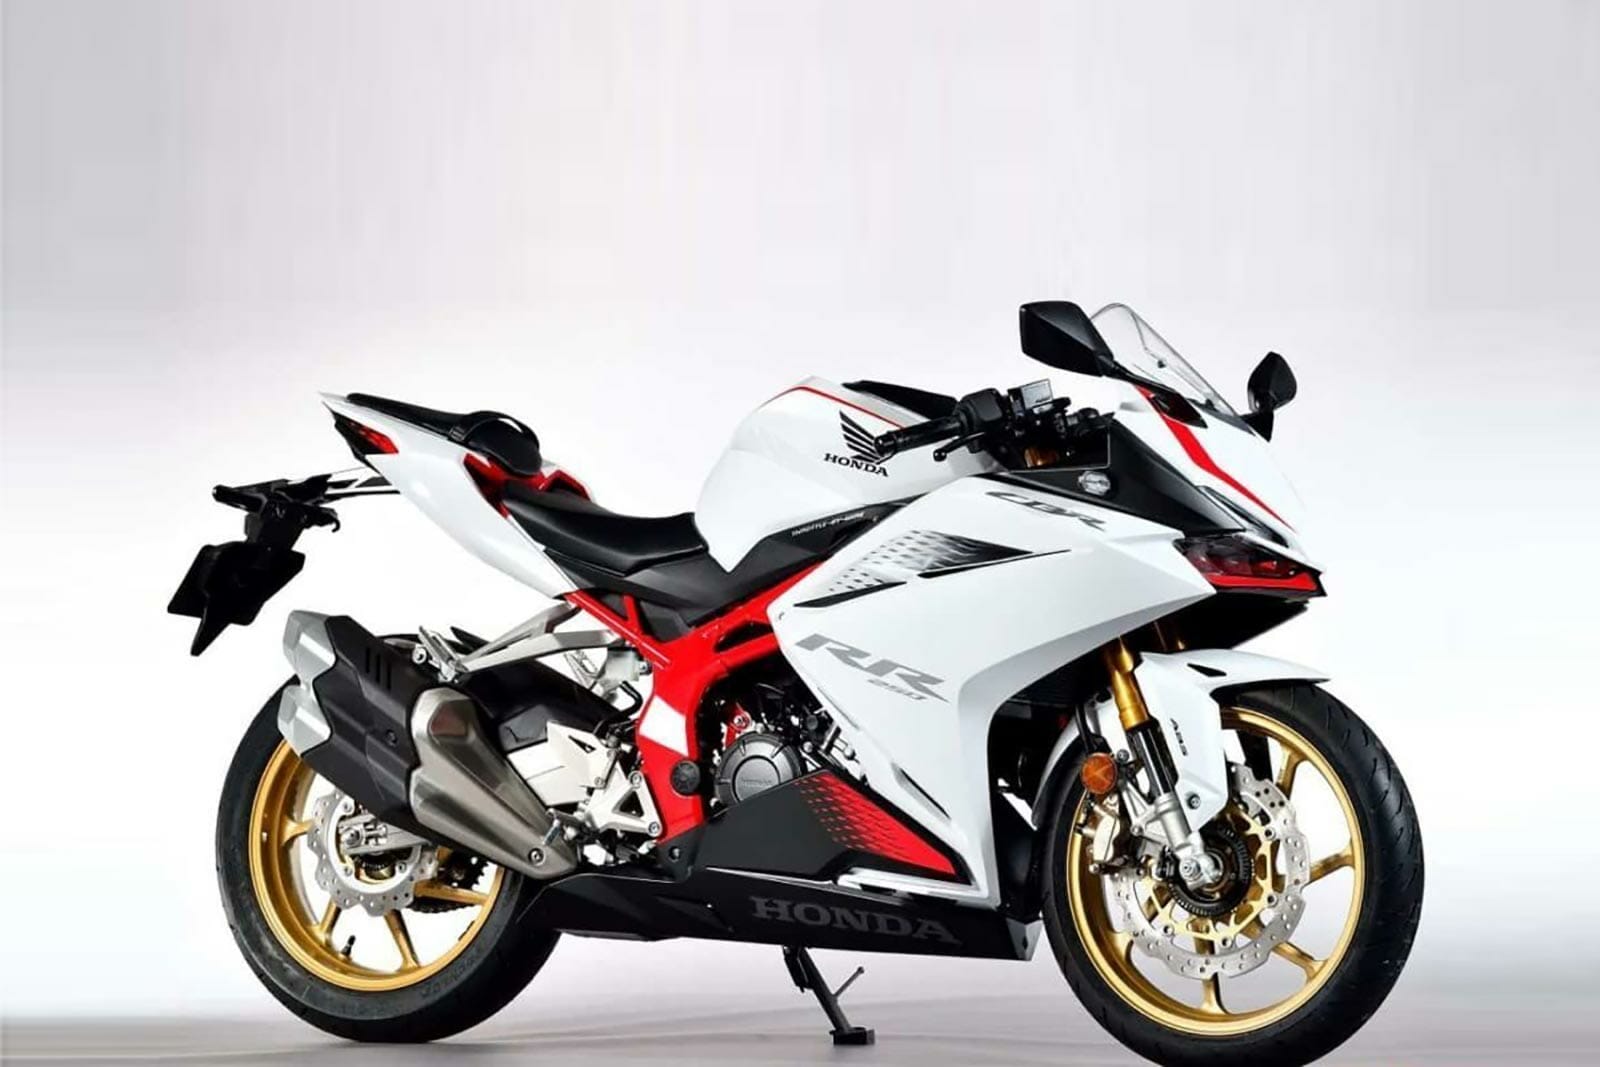 Honda CBR250RR should get a little more power and equipment
- also in the MOTORCYCLE NEWS APP